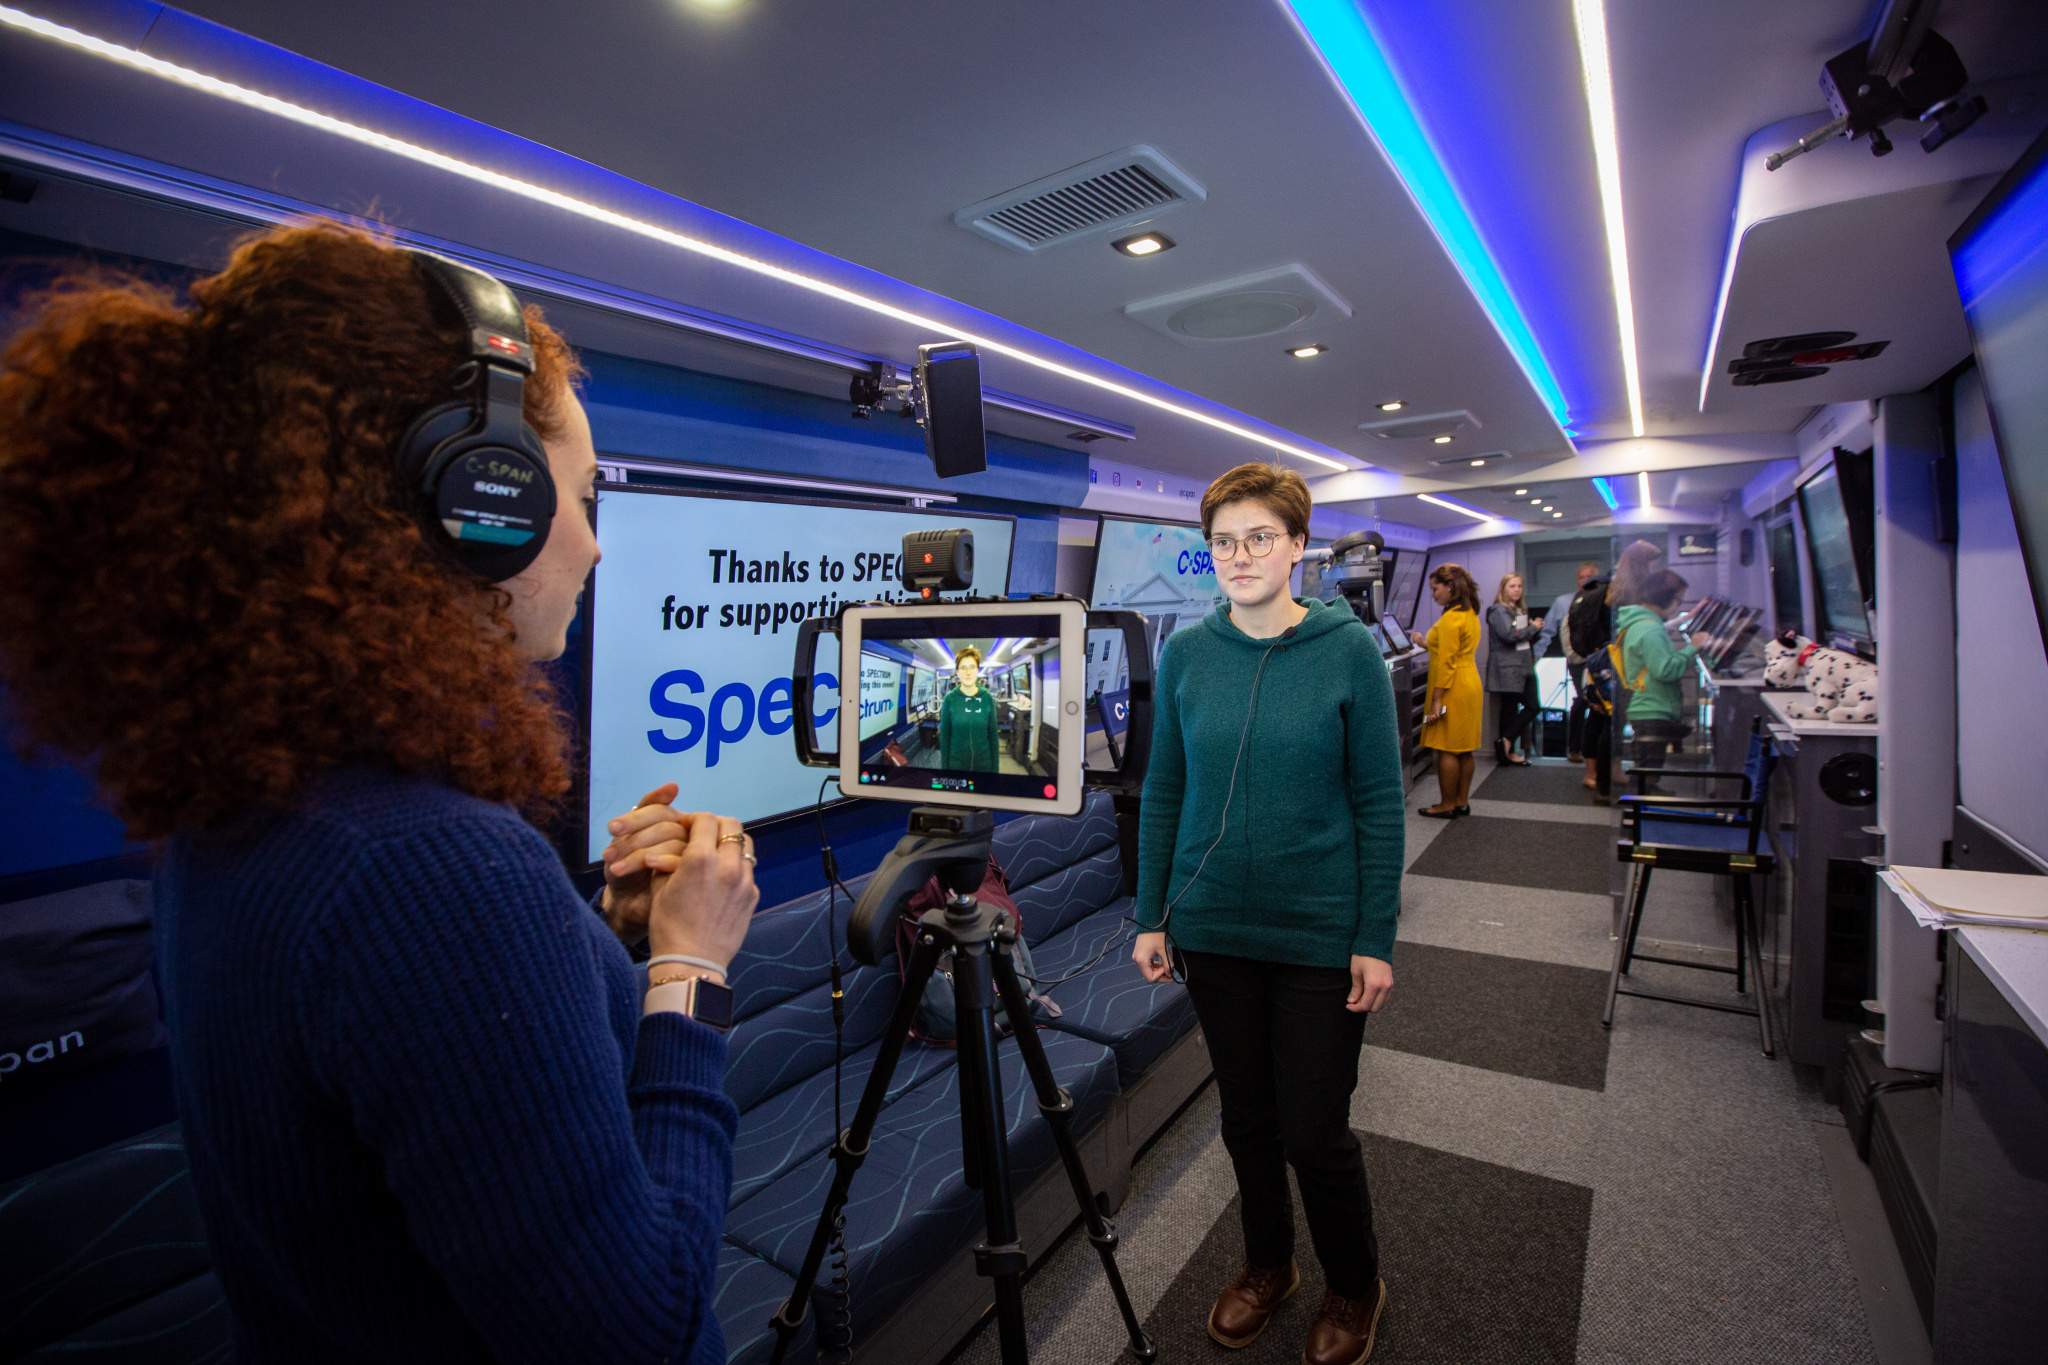 C-SPAN personnel interview visitors on the 2020 presidential campaign (Photo by Chad Ratje)